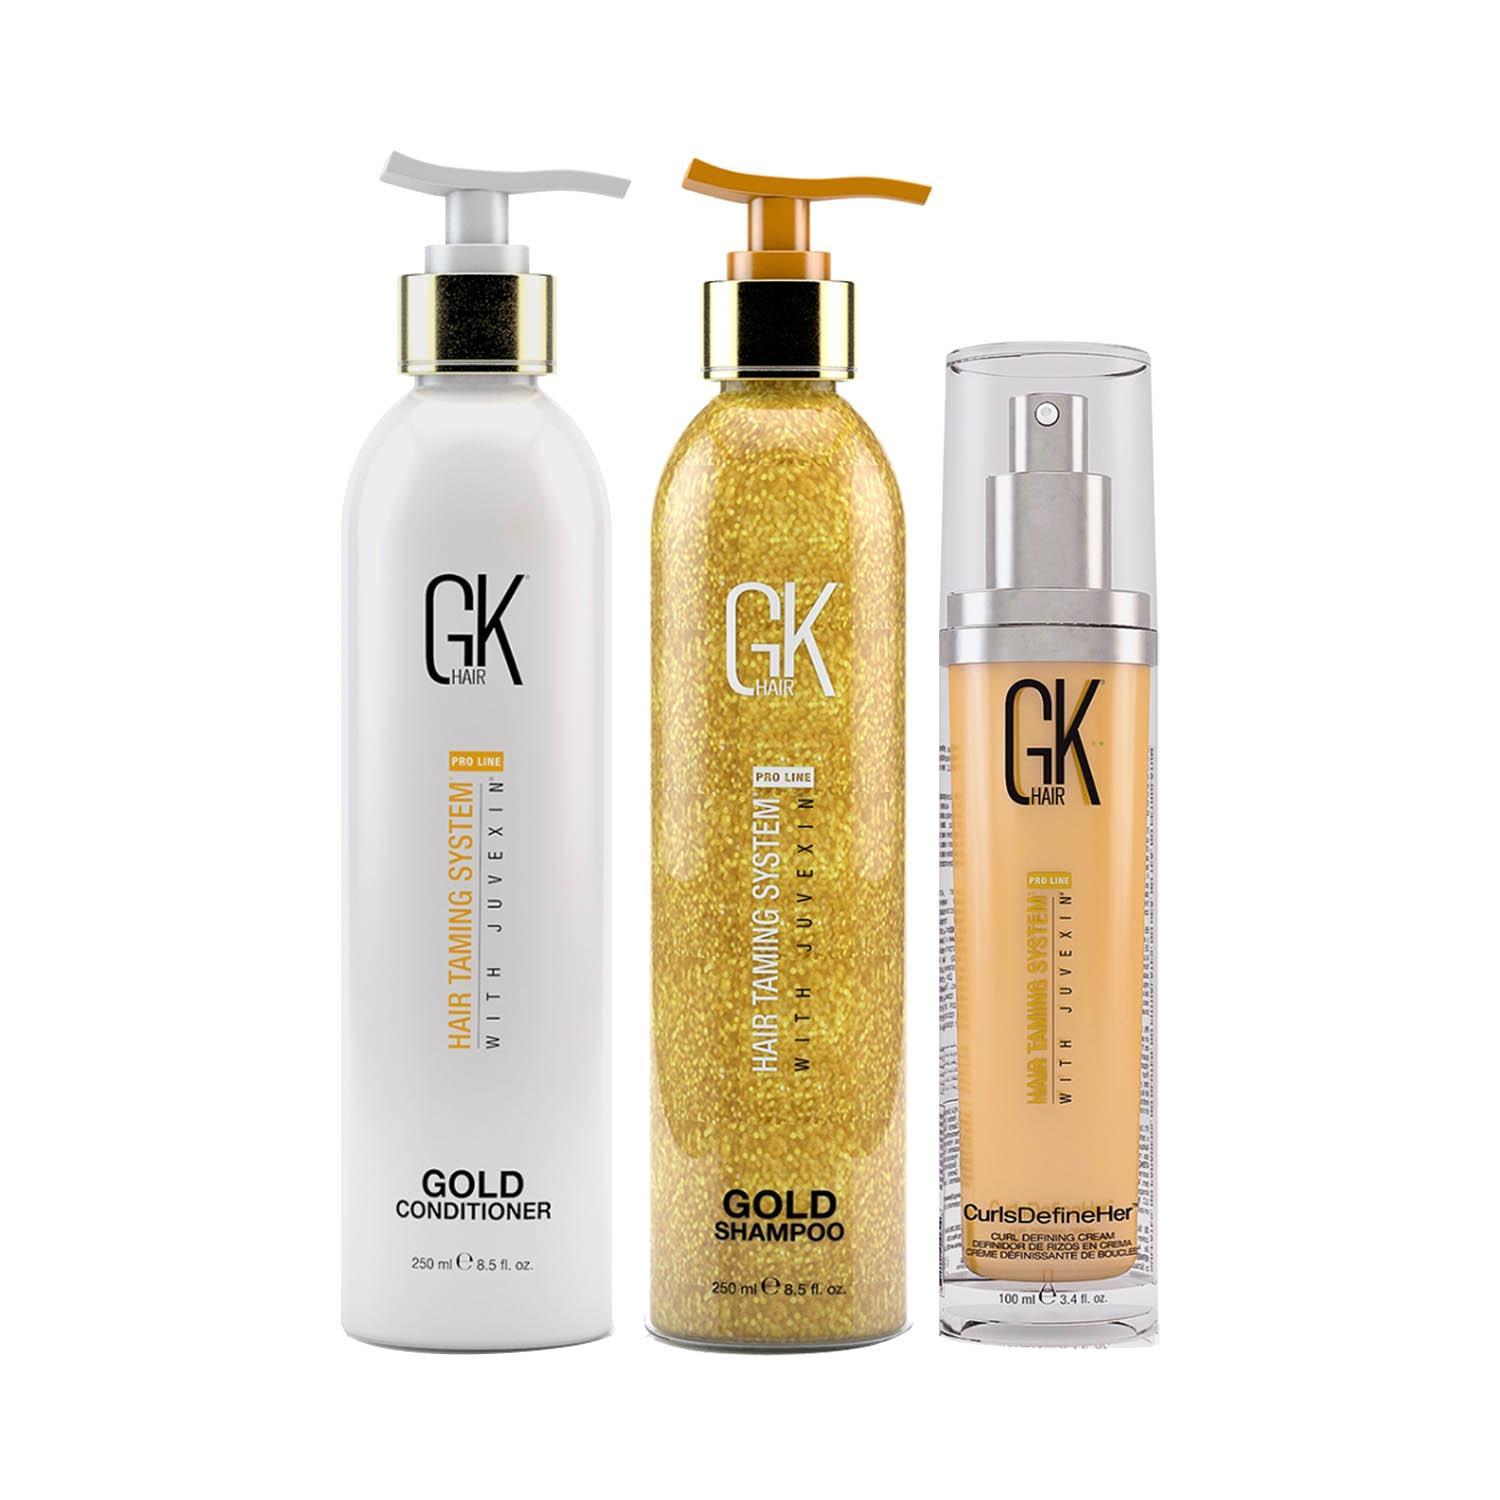 gk hair gold shampoo and conditioner 250ml with curls defineher her 100ml